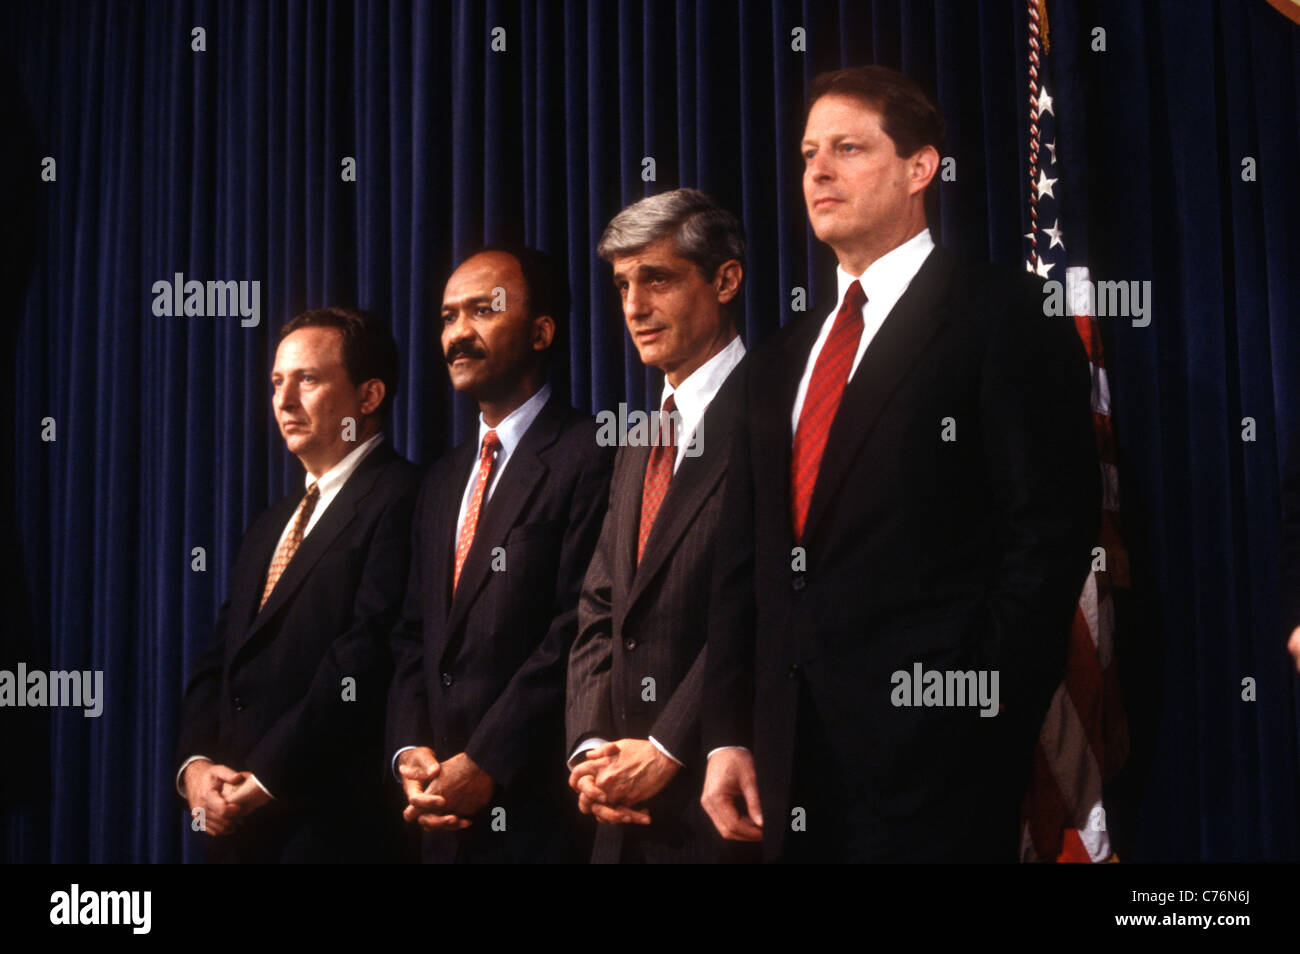 (L-R) Lawrence Summers, Franklin Raines, Robert Rubin and Al Gore during a news conference Stock Photo